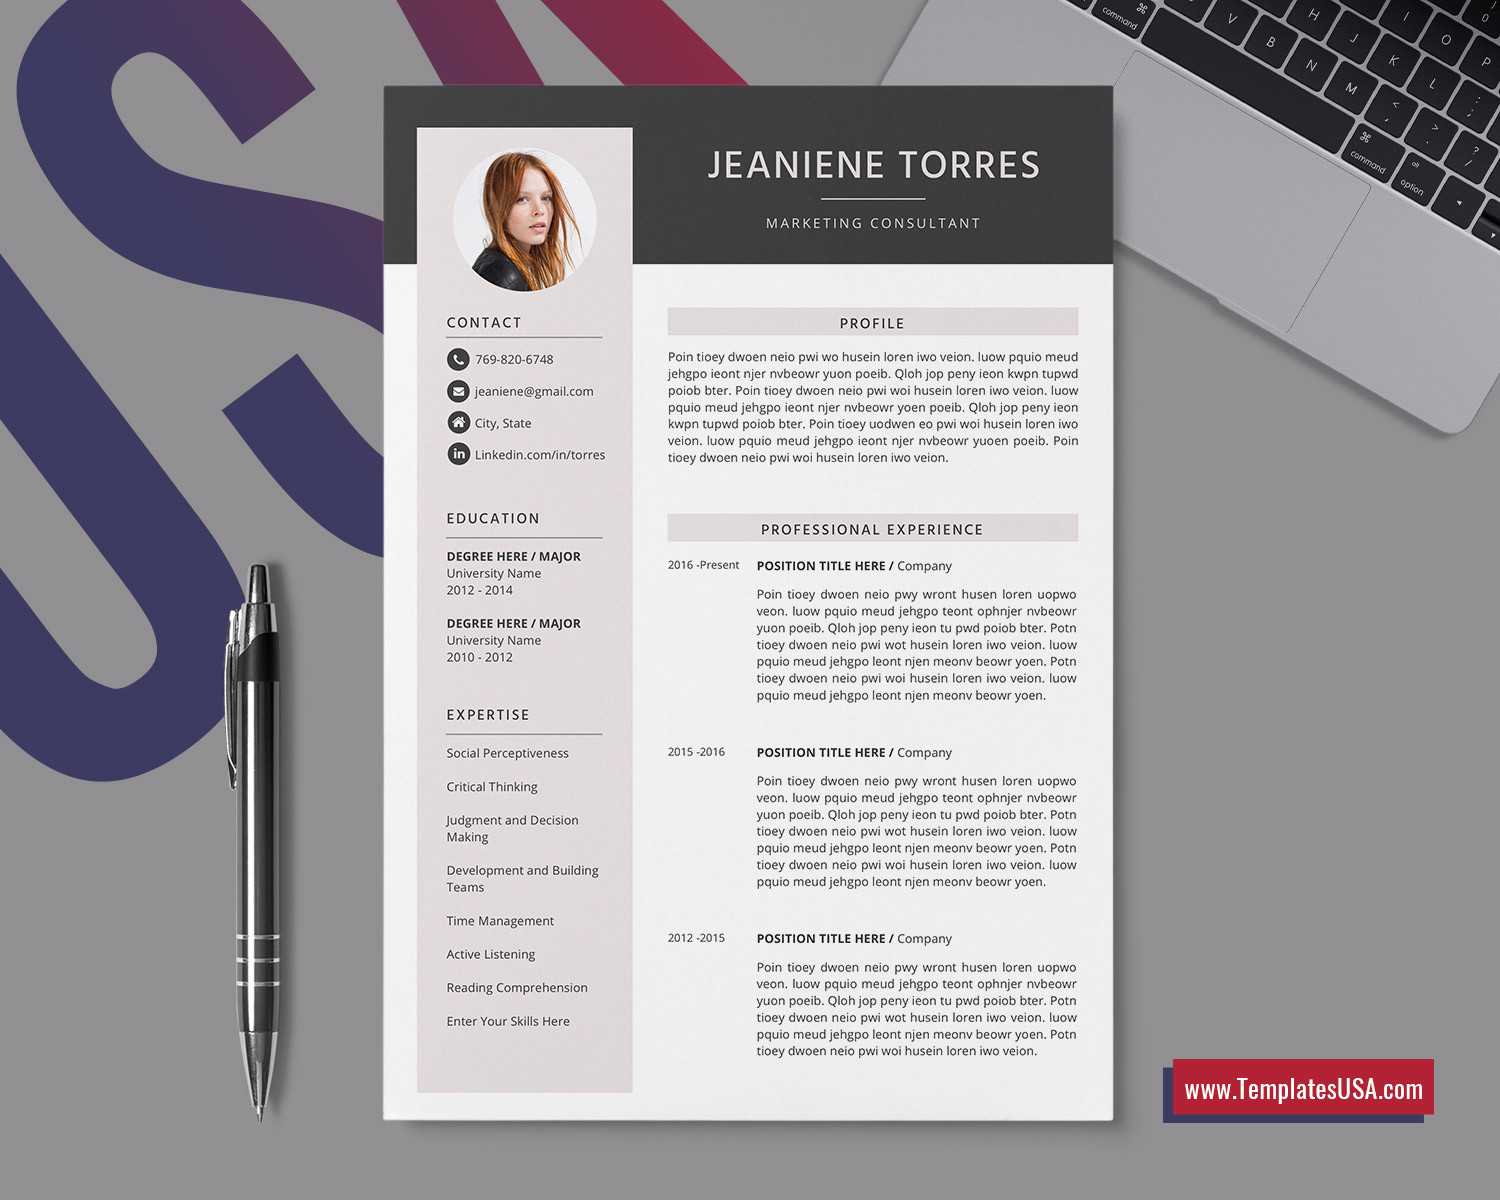 creating a perfect resume for 2021 jobs purchase the one that is best for you proudly designed by templatesusa